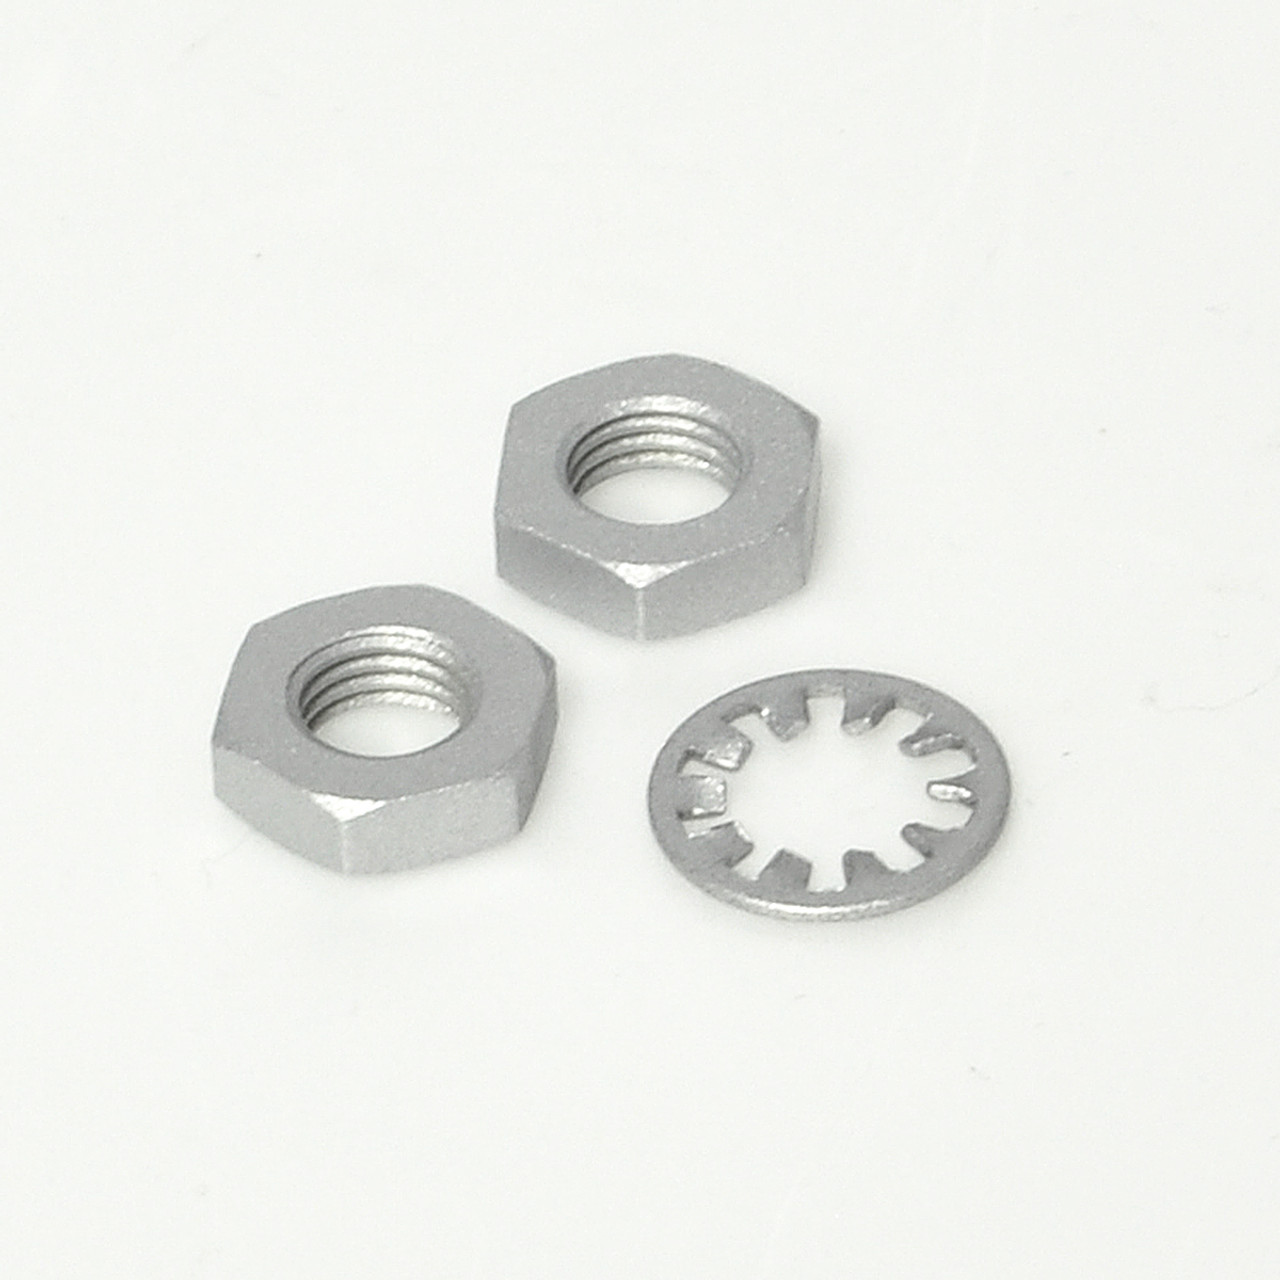 M8 PTFE NUTS WITH LOCKWASHER